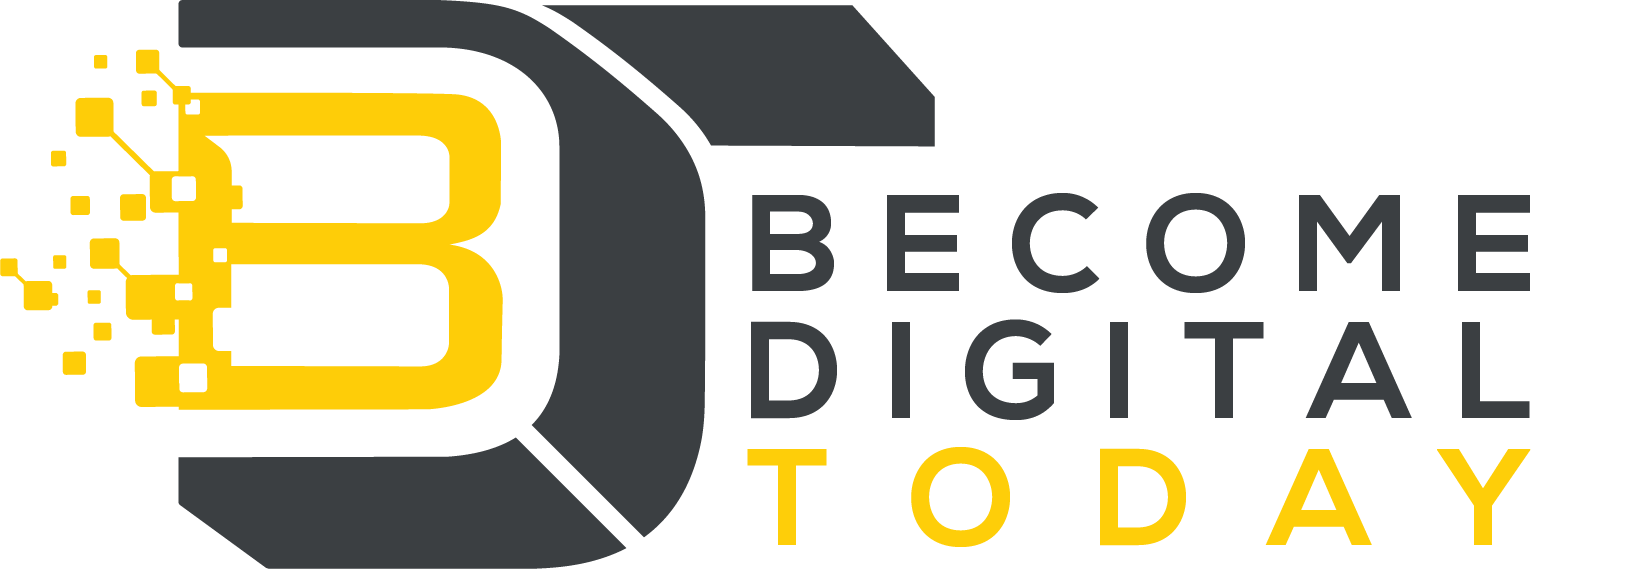 Become Digital Today